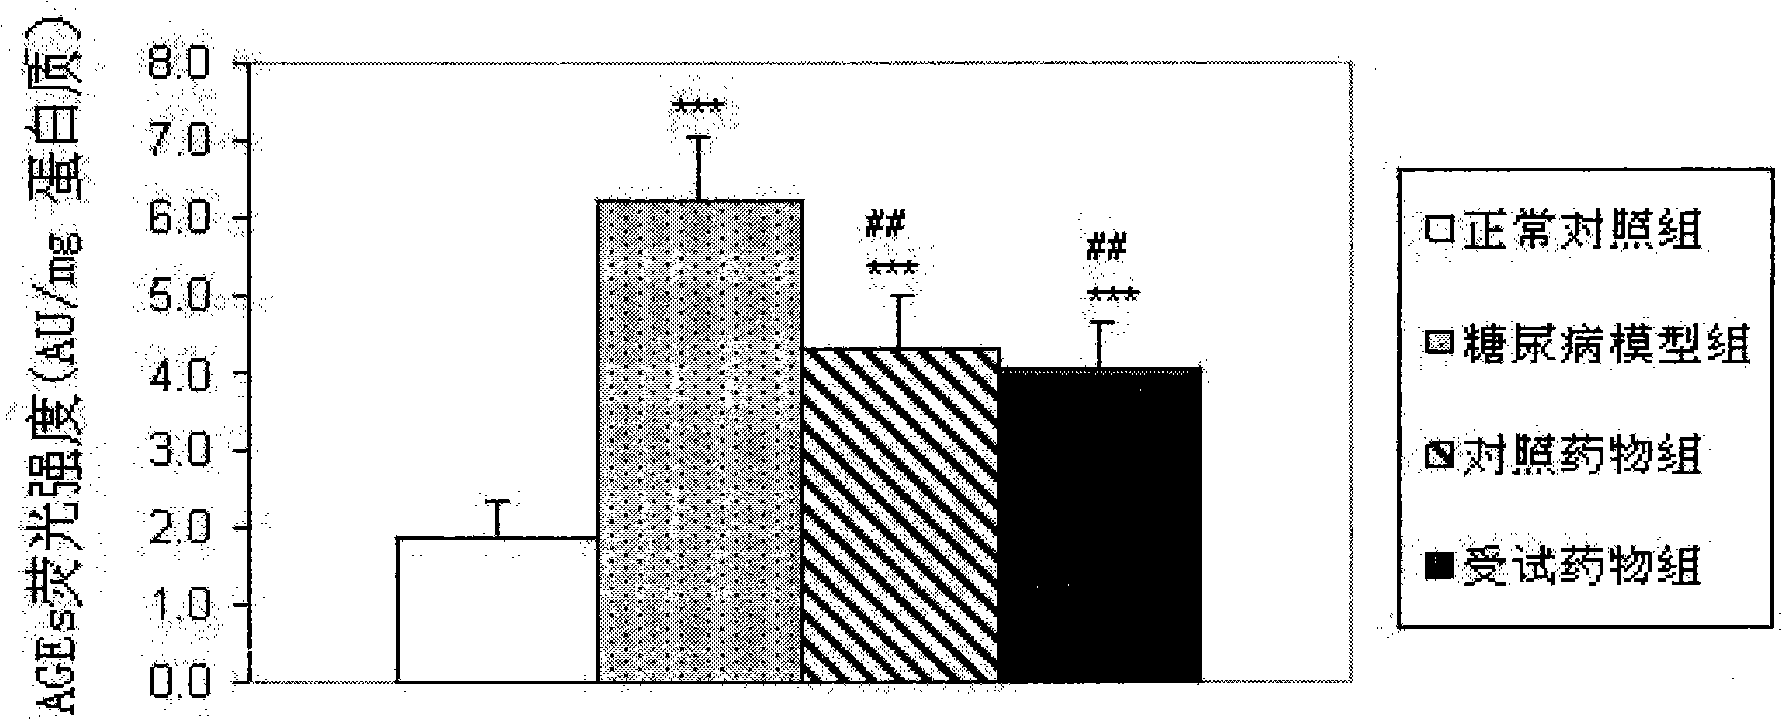 Plant extract composite for preventing diabetes complication and senium and preparation method thereof